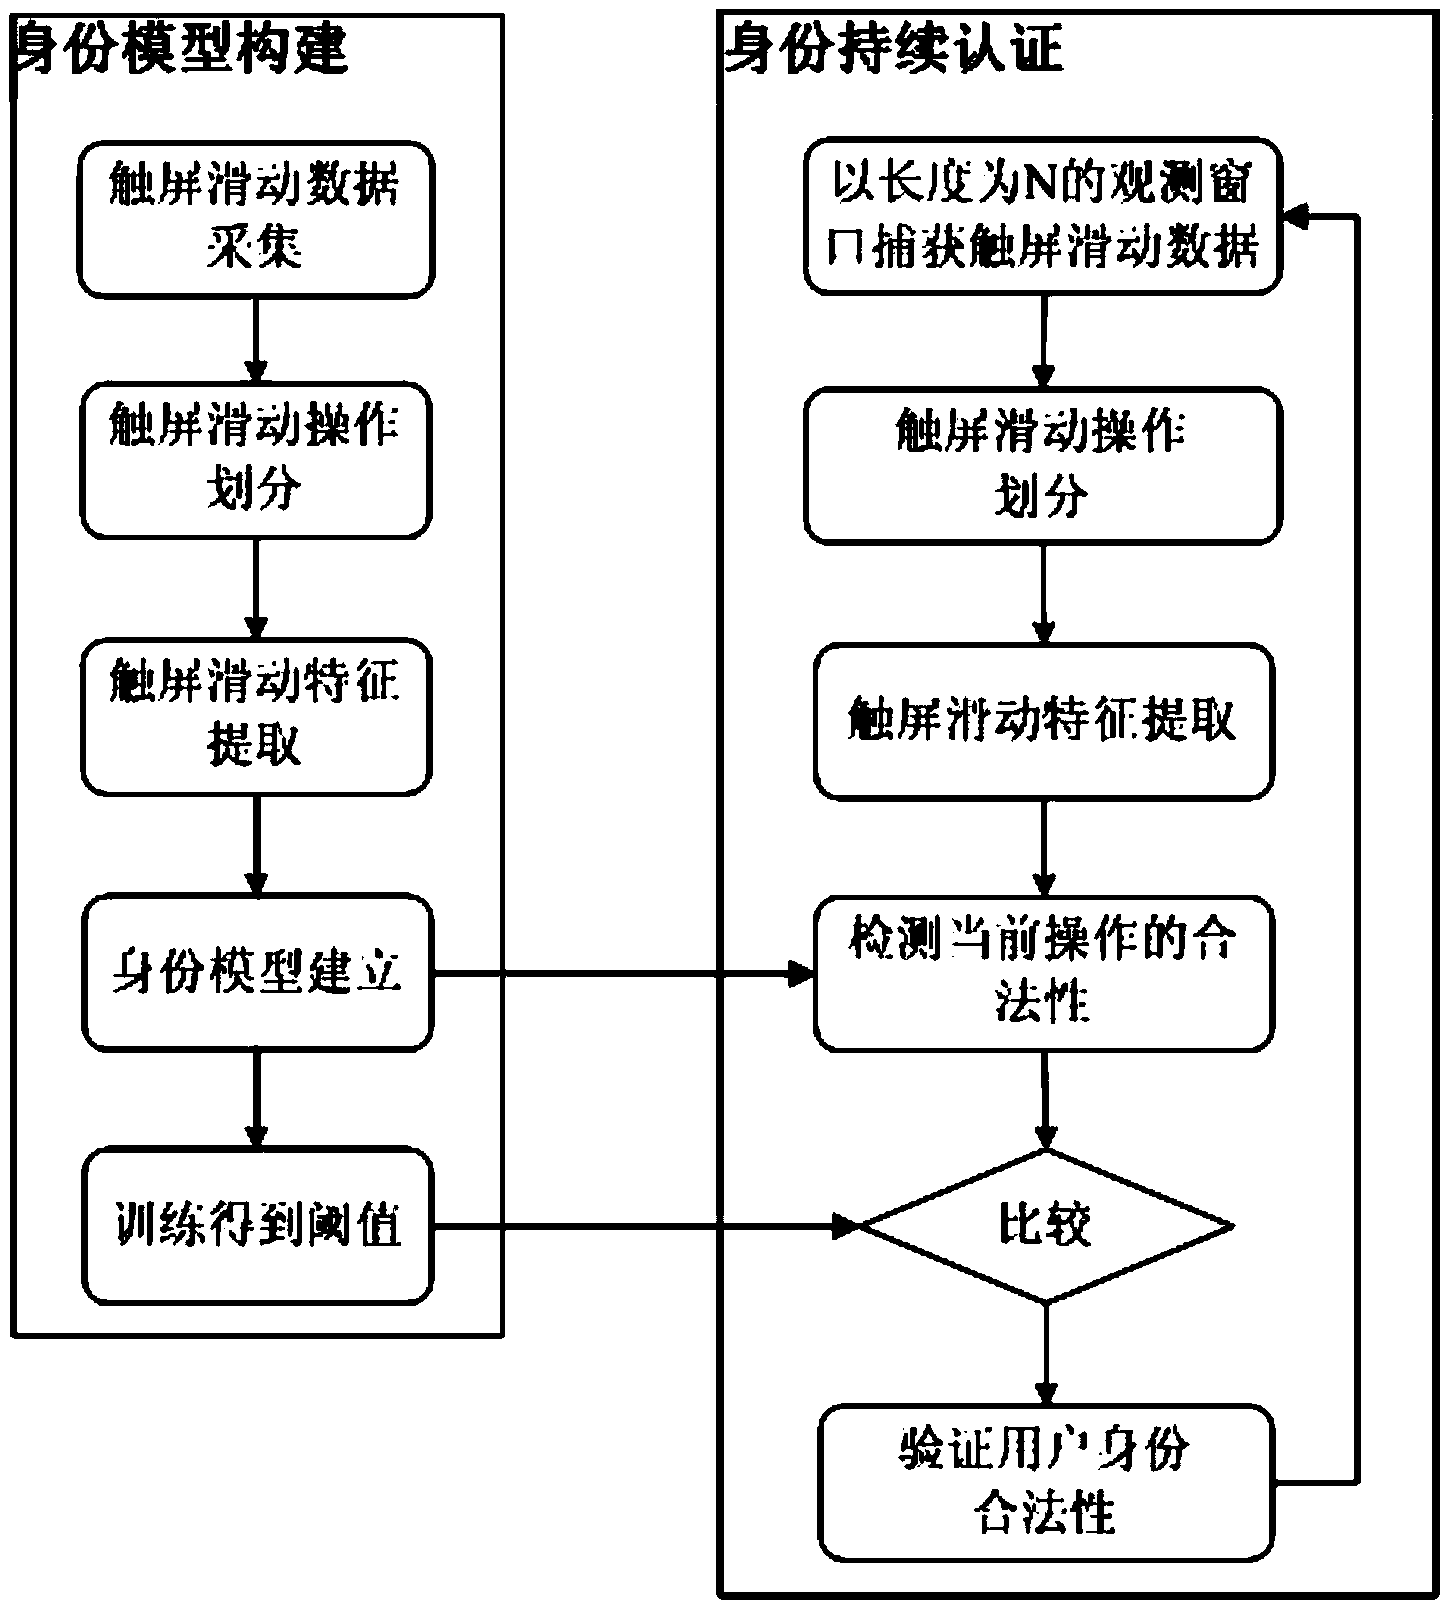 Continuous identity authentication method based on touch screen slip behavior characteristics